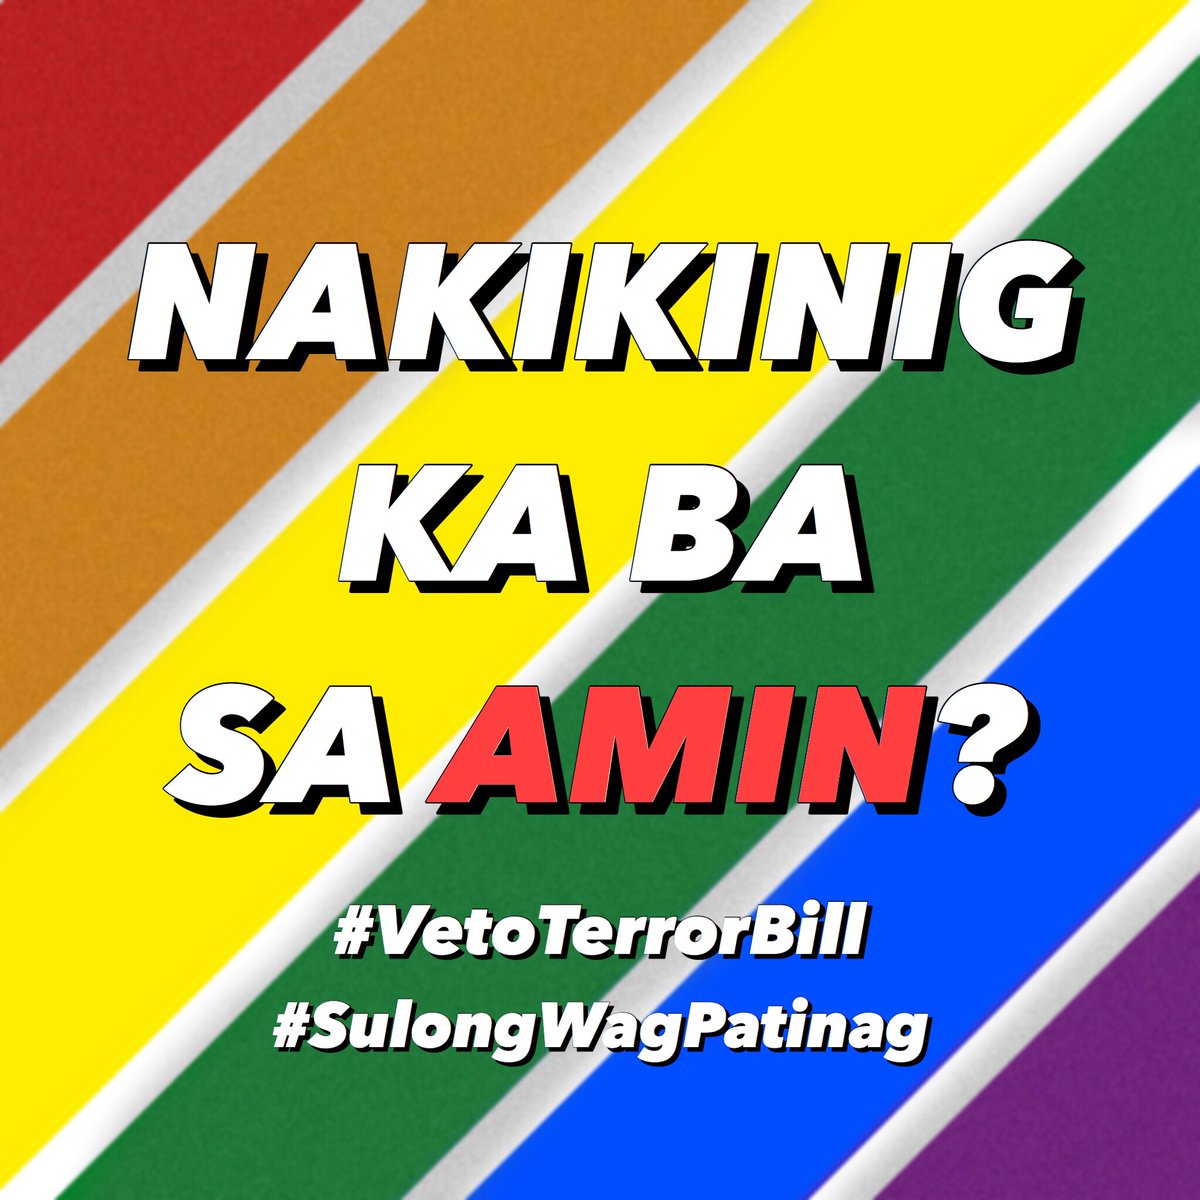 “We temporarily removed the ‘Ben&Ben’ Logo from our profile to protect our idols. But we still stand with you. We believe FREEDOM and LIVES matter. We will not be silenced. We are still together in this fight.

Love,
BBaklas Admins”

#VetoTerrorBill
#SulongWagPatinag